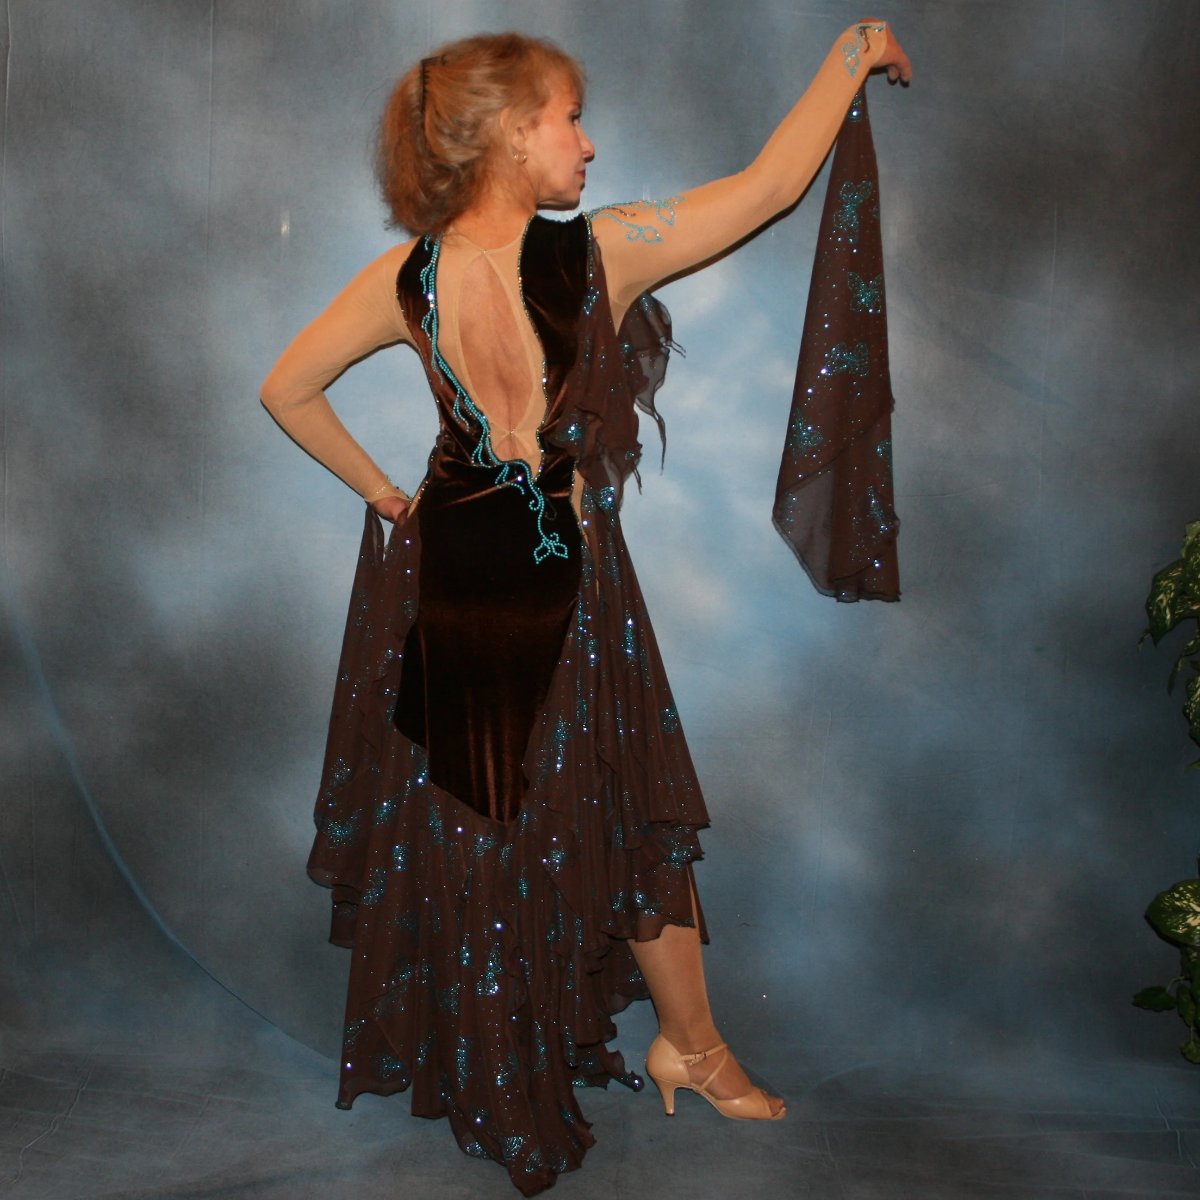 Crystal's Creations back view of Exquisite brown ballroom dance dress with turquoise accents was created in luxurious chocolate brown stretch velvet on a nude illusion base…featuring billowing yards of brown chiffon petal panels with glittery turquoise butterflies. 